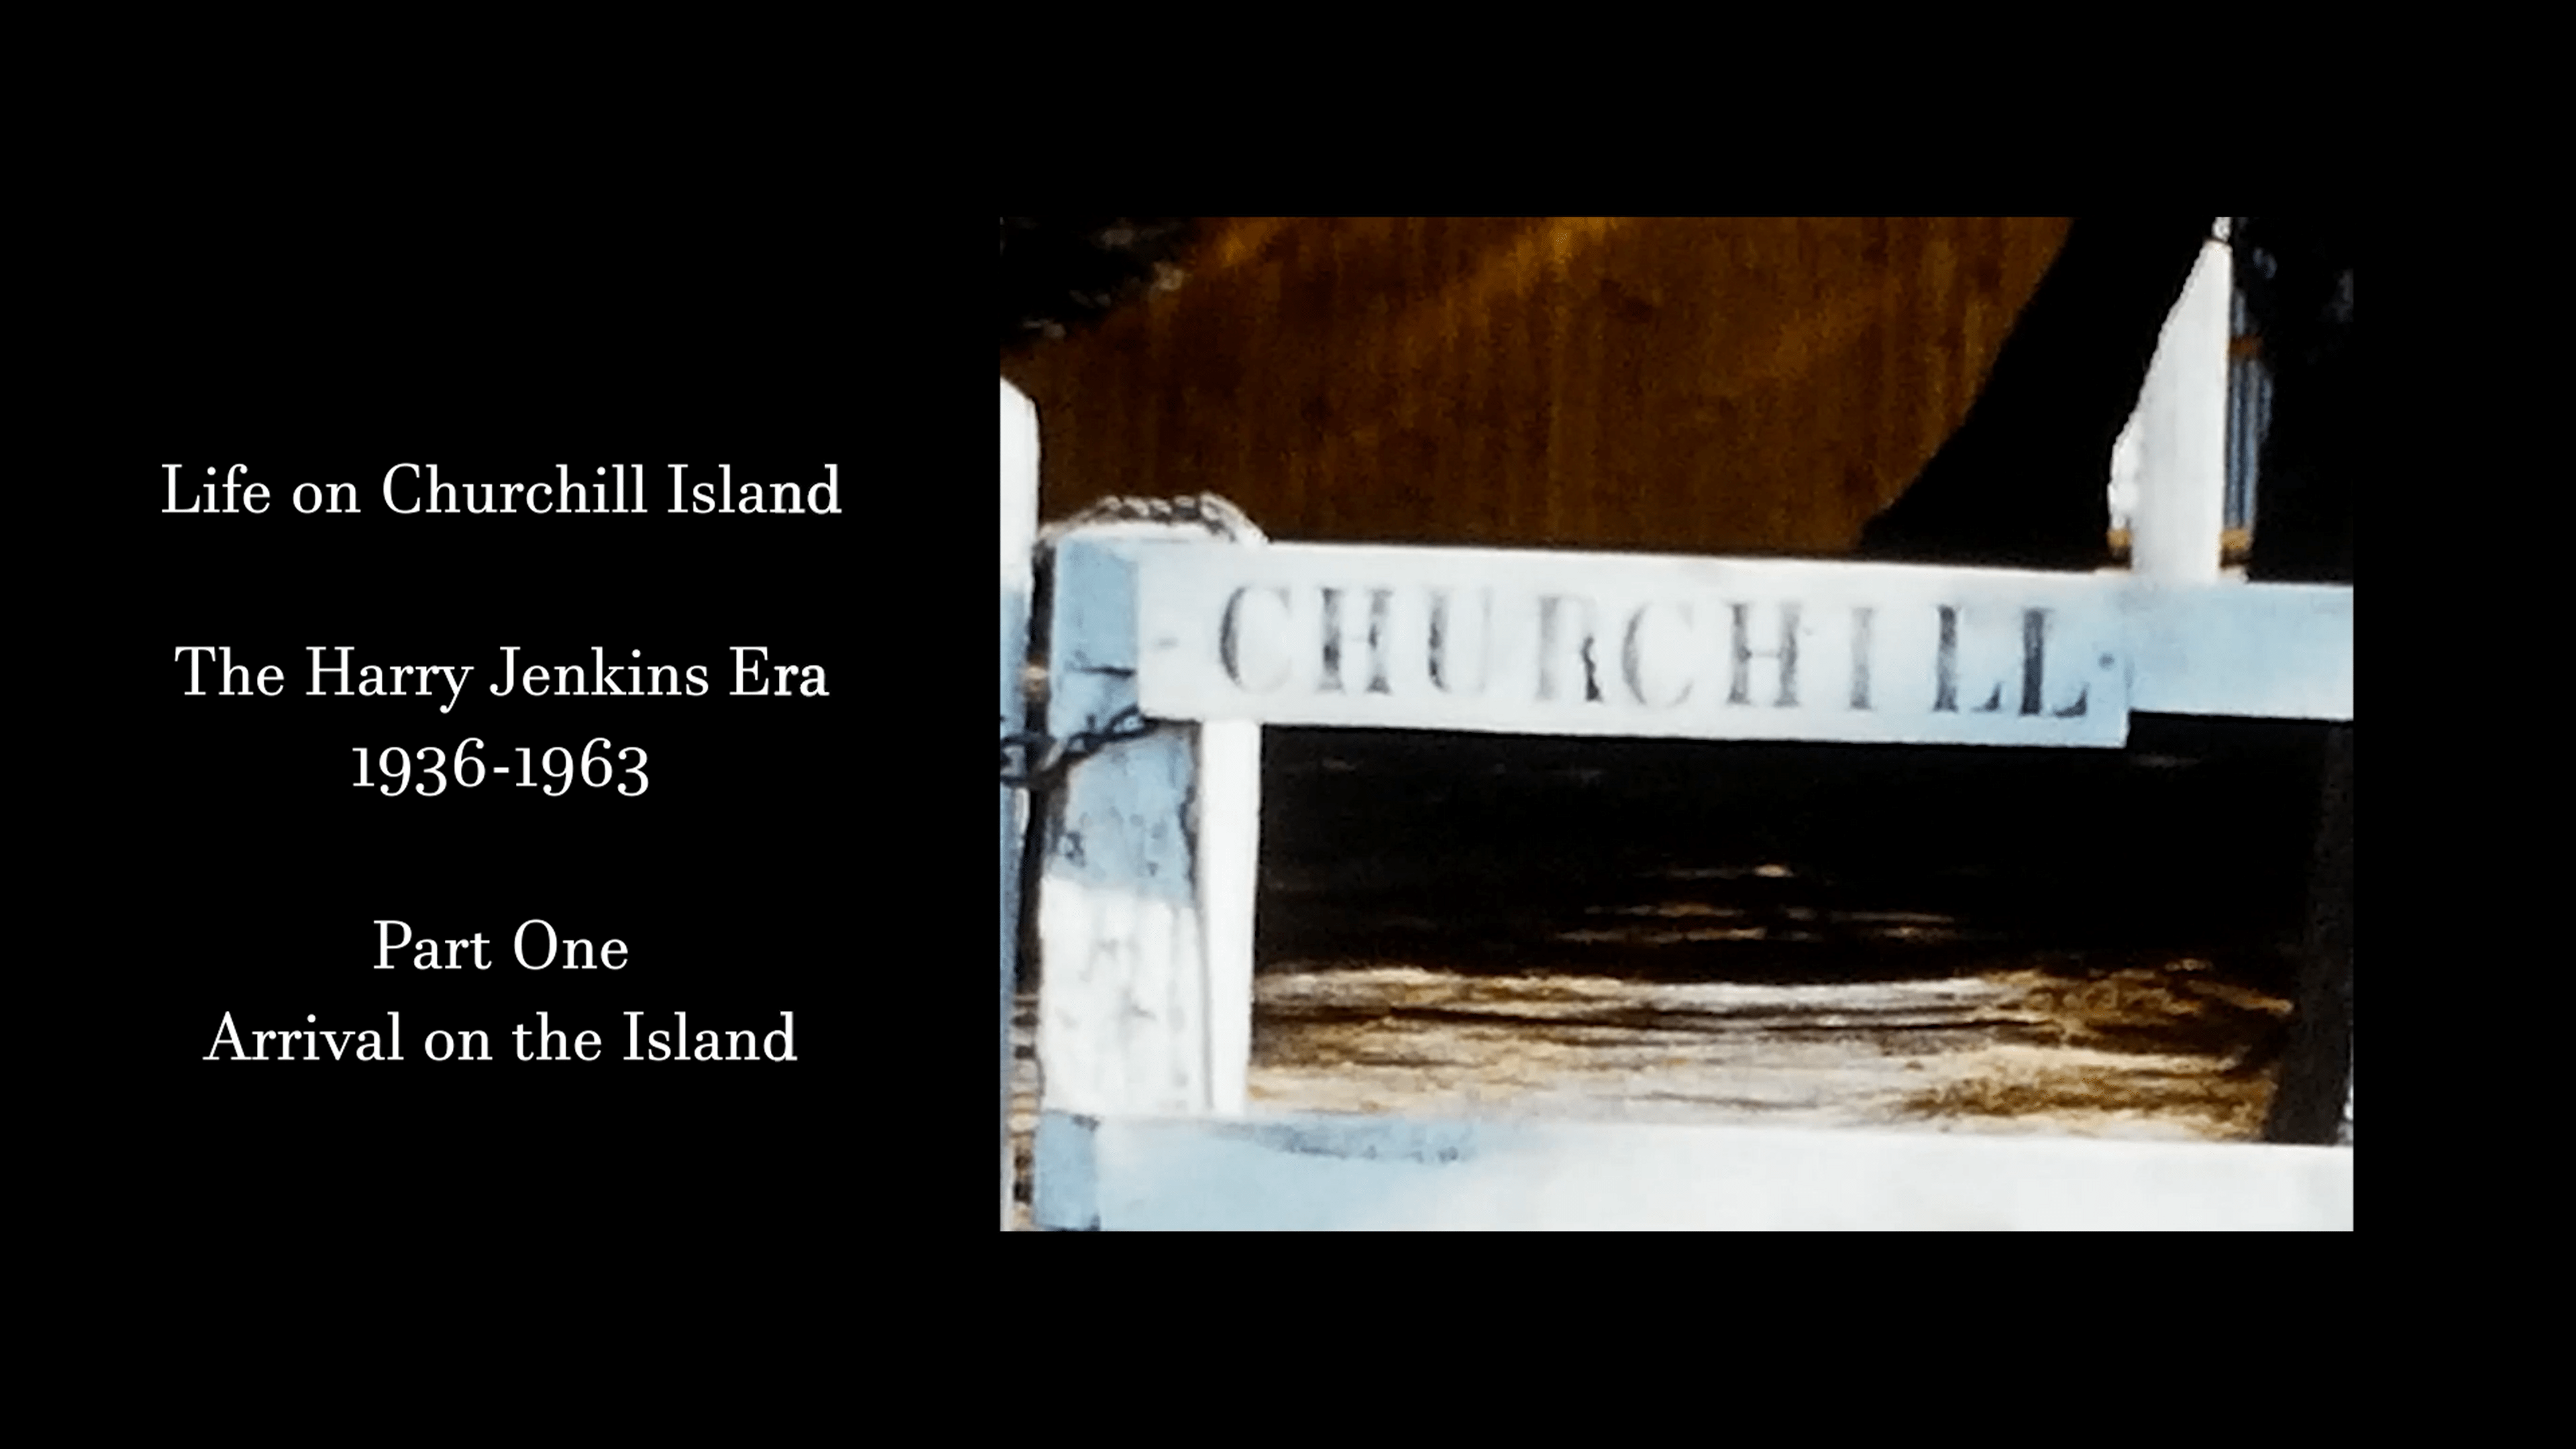 Video - Life on Churchill Island Part 1 - Arrival on the Island